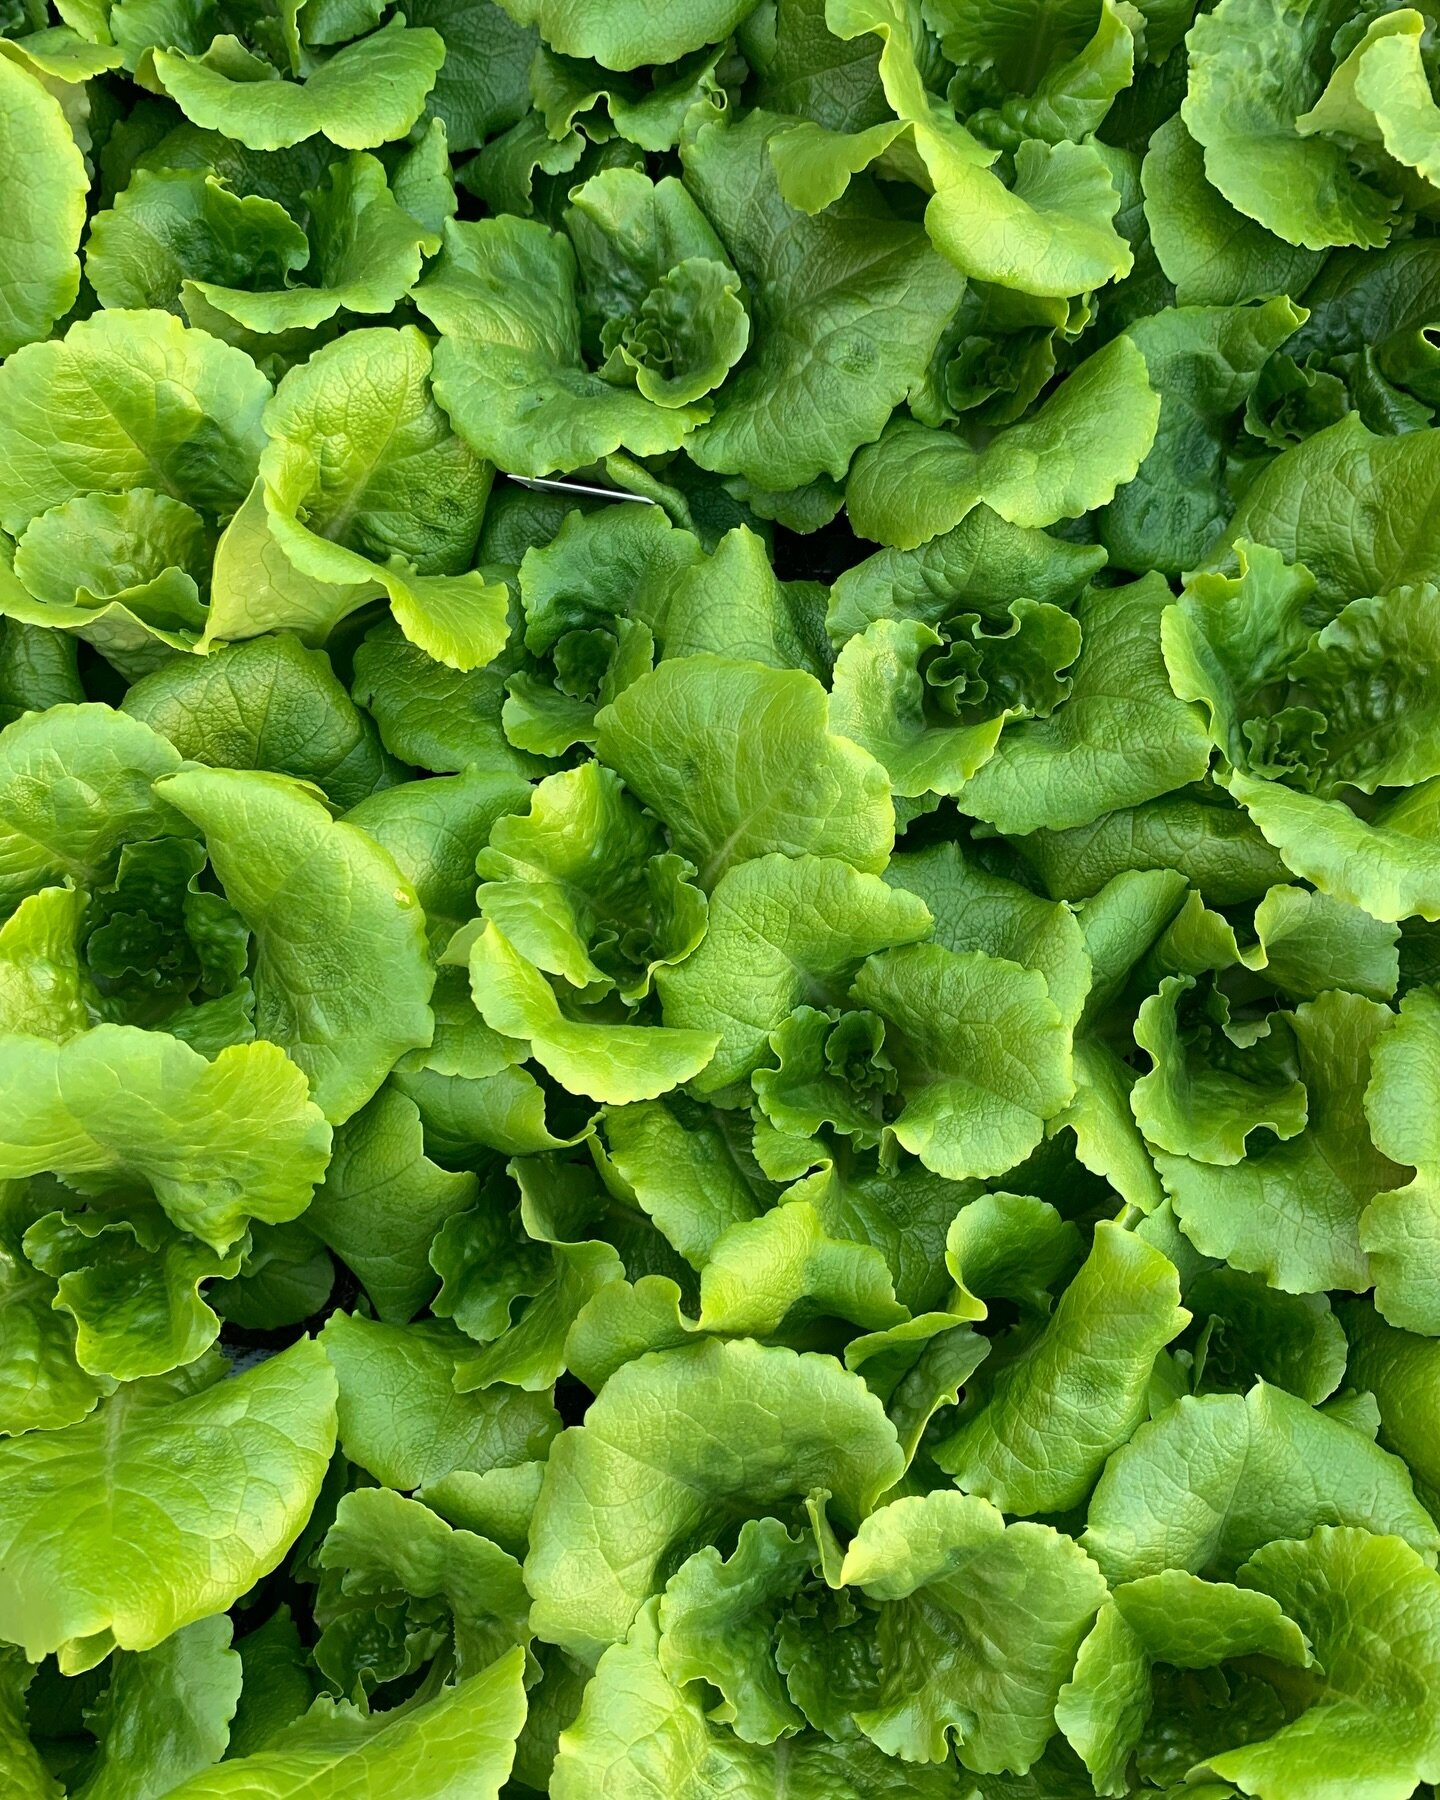 Can you believe this lettuce has #nofilter?! 😍🥬 Find lettuce, kale, Pak Choi, collards, and more now!